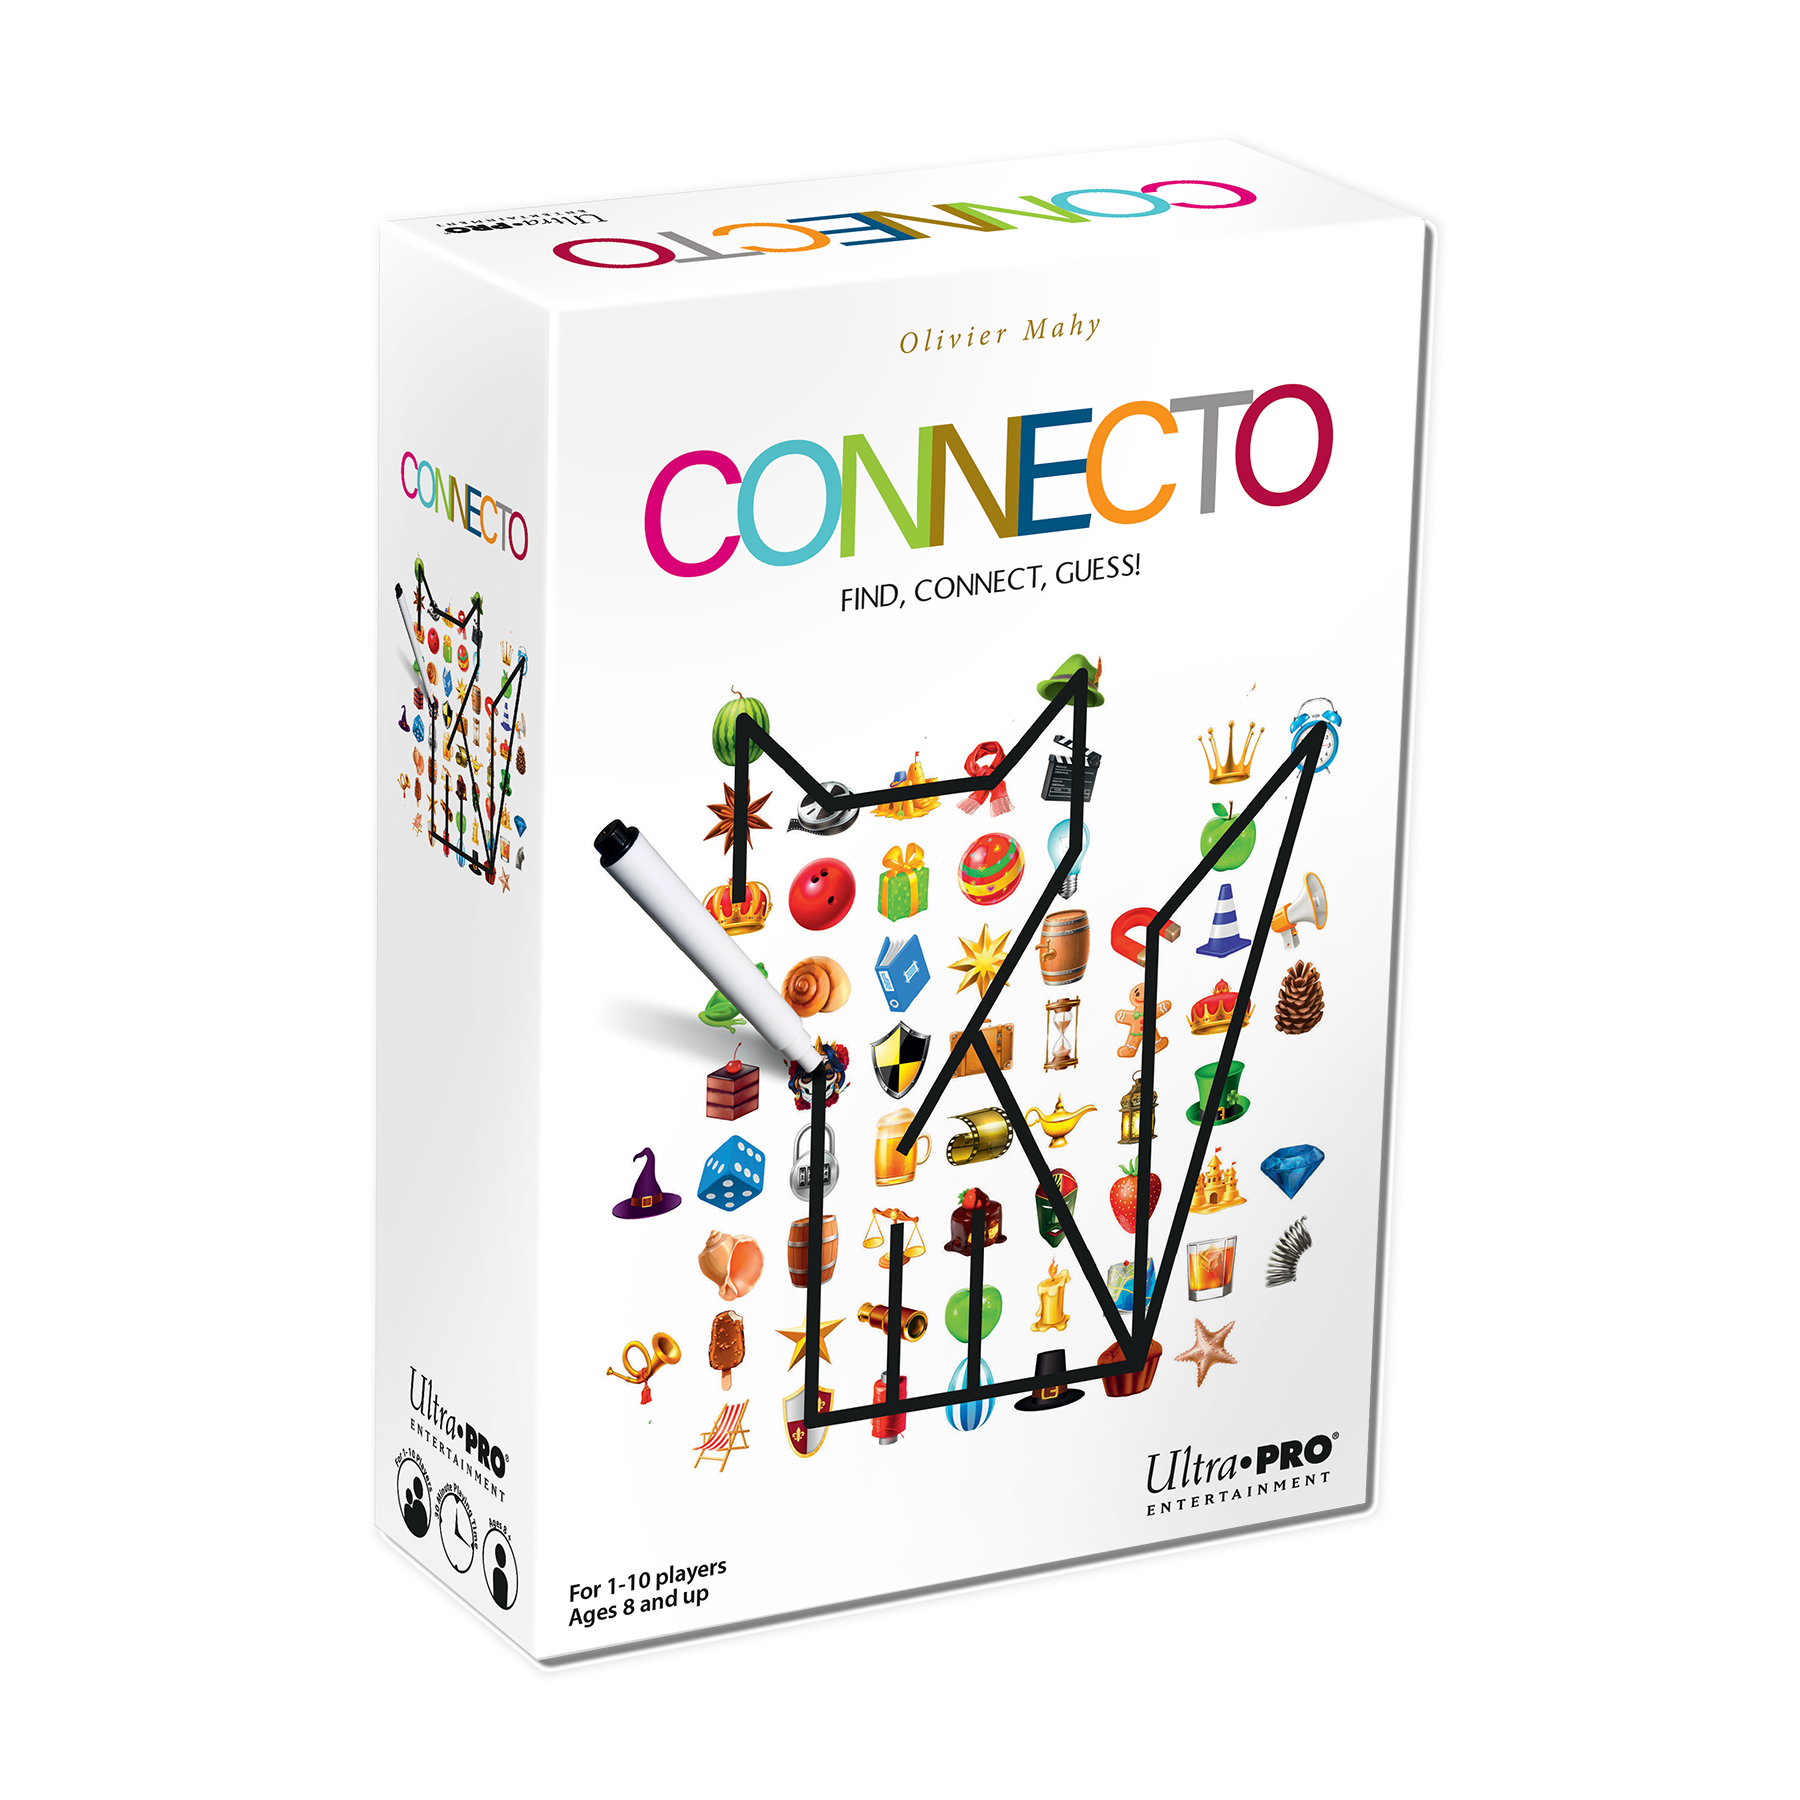 Connecto product by Ultra PRO